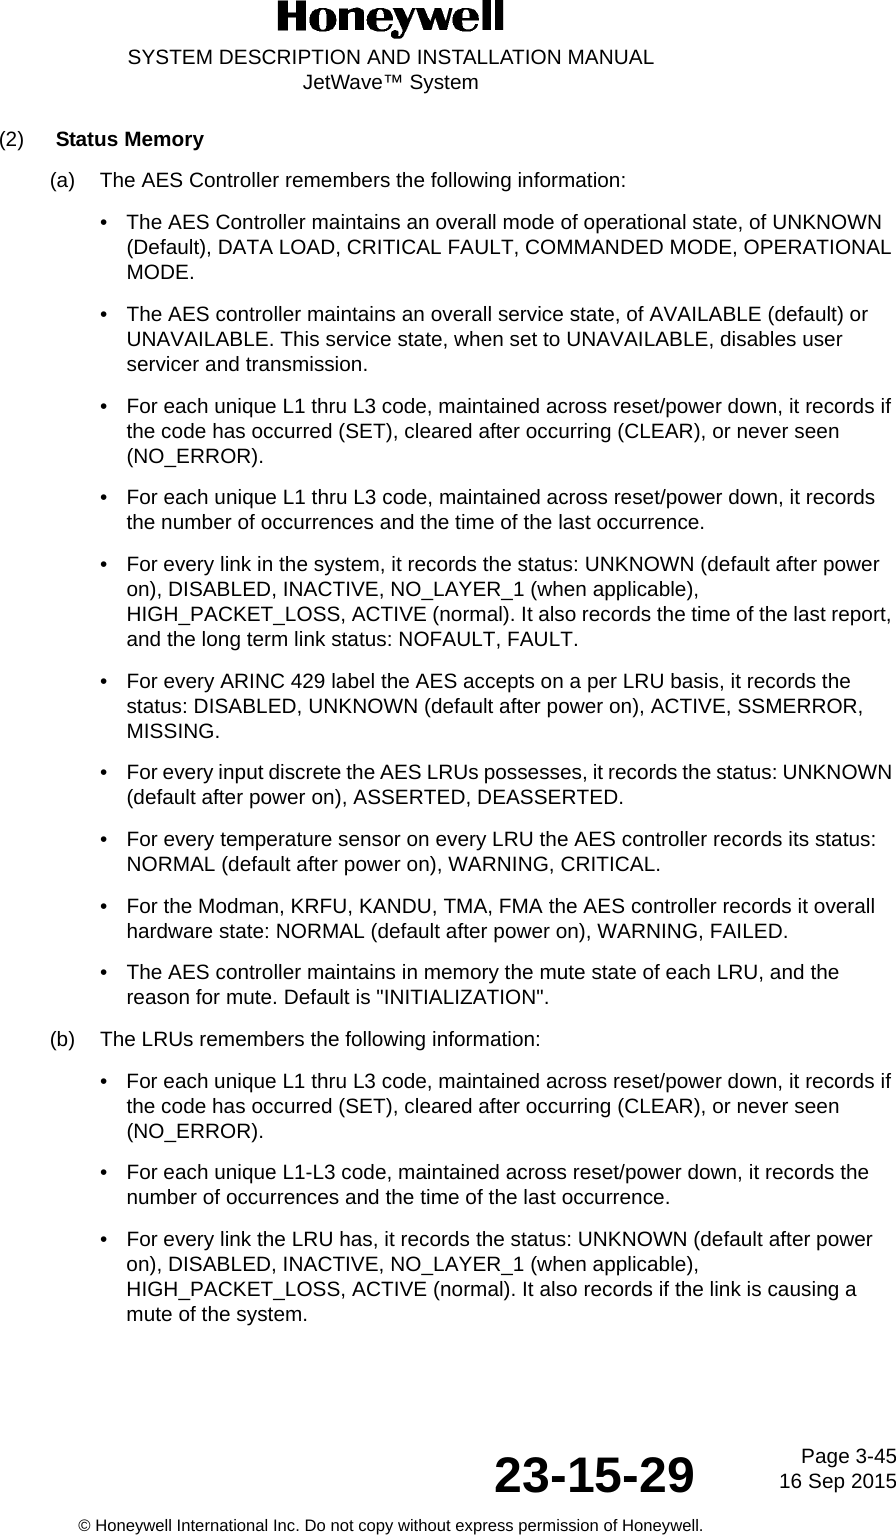 Page 3-4516 Sep 201523-15-29SYSTEM DESCRIPTION AND INSTALLATION MANUALJetWave™ System© Honeywell International Inc. Do not copy without express permission of Honeywell.(2) Status Memory(a) The AES Controller remembers the following information:• The AES Controller maintains an overall mode of operational state, of UNKNOWN (Default), DATA LOAD, CRITICAL FAULT, COMMANDED MODE, OPERATIONAL MODE.• The AES controller maintains an overall service state, of AVAILABLE (default) or UNAVAILABLE. This service state, when set to UNAVAILABLE, disables user servicer and transmission.• For each unique L1 thru L3 code, maintained across reset/power down, it records if the code has occurred (SET), cleared after occurring (CLEAR), or never seen (NO_ERROR).• For each unique L1 thru L3 code, maintained across reset/power down, it records the number of occurrences and the time of the last occurrence.• For every link in the system, it records the status: UNKNOWN (default after power on), DISABLED, INACTIVE, NO_LAYER_1 (when applicable), HIGH_PACKET_LOSS, ACTIVE (normal). It also records the time of the last report, and the long term link status: NOFAULT, FAULT.• For every ARINC 429 label the AES accepts on a per LRU basis, it records the status: DISABLED, UNKNOWN (default after power on), ACTIVE, SSMERROR, MISSING.• For every input discrete the AES LRUs possesses, it records the status: UNKNOWN (default after power on), ASSERTED, DEASSERTED.• For every temperature sensor on every LRU the AES controller records its status: NORMAL (default after power on), WARNING, CRITICAL.• For the Modman, KRFU, KANDU, TMA, FMA the AES controller records it overall hardware state: NORMAL (default after power on), WARNING, FAILED.• The AES controller maintains in memory the mute state of each LRU, and the reason for mute. Default is &quot;INITIALIZATION&quot;.(b) The LRUs remembers the following information:• For each unique L1 thru L3 code, maintained across reset/power down, it records if the code has occurred (SET), cleared after occurring (CLEAR), or never seen (NO_ERROR).• For each unique L1-L3 code, maintained across reset/power down, it records the number of occurrences and the time of the last occurrence.• For every link the LRU has, it records the status: UNKNOWN (default after power on), DISABLED, INACTIVE, NO_LAYER_1 (when applicable), HIGH_PACKET_LOSS, ACTIVE (normal). It also records if the link is causing a mute of the system.